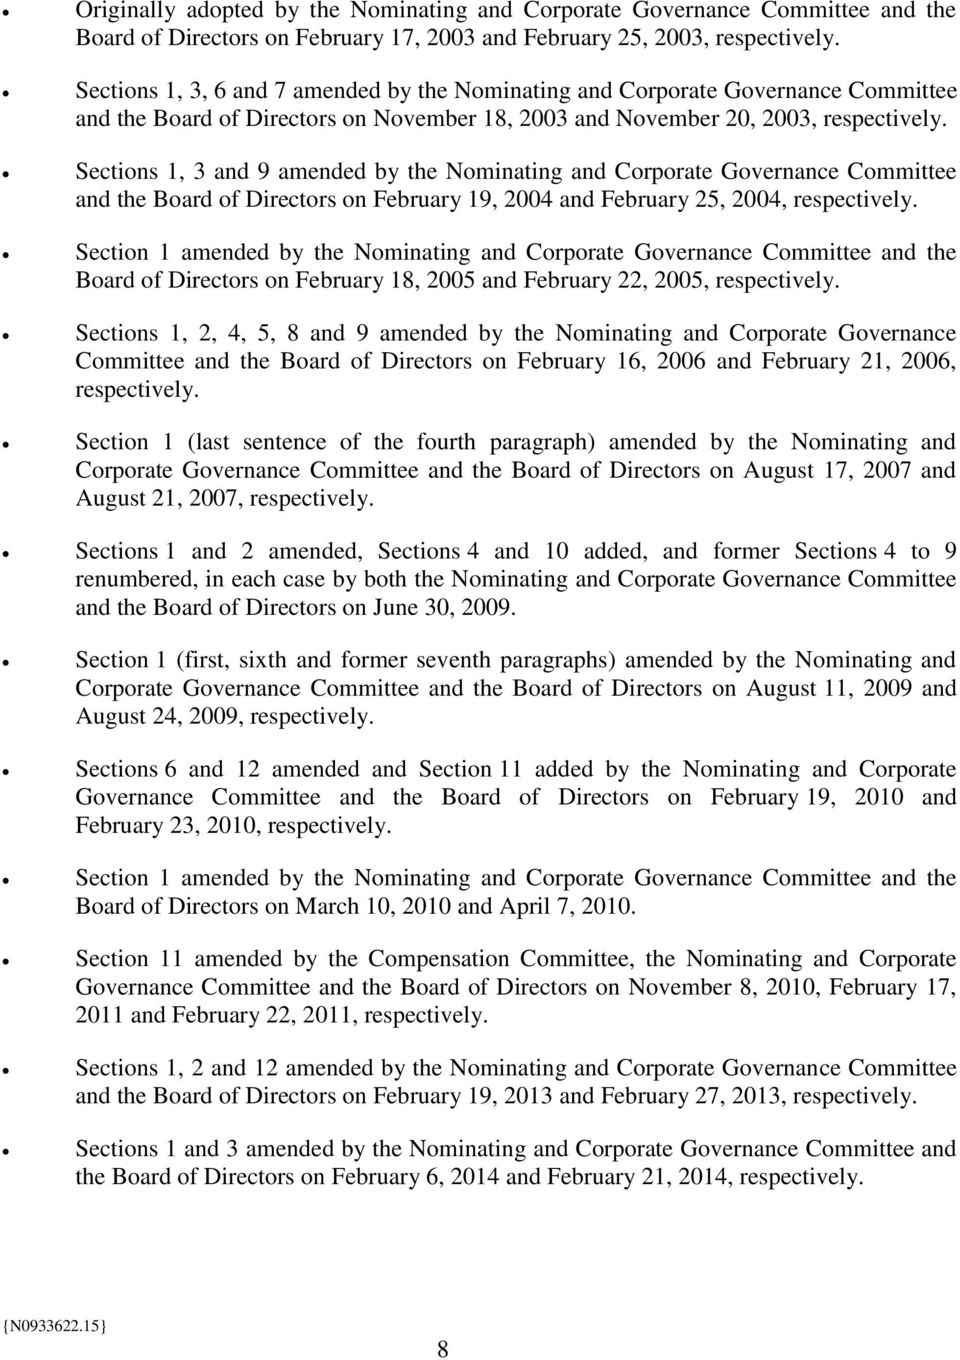 Sections 1, 3 and 9 amended by the Nominating and Corporate Governance Committee and the Board of Directors on February 19, 2004 and February 25, 2004, respectively.